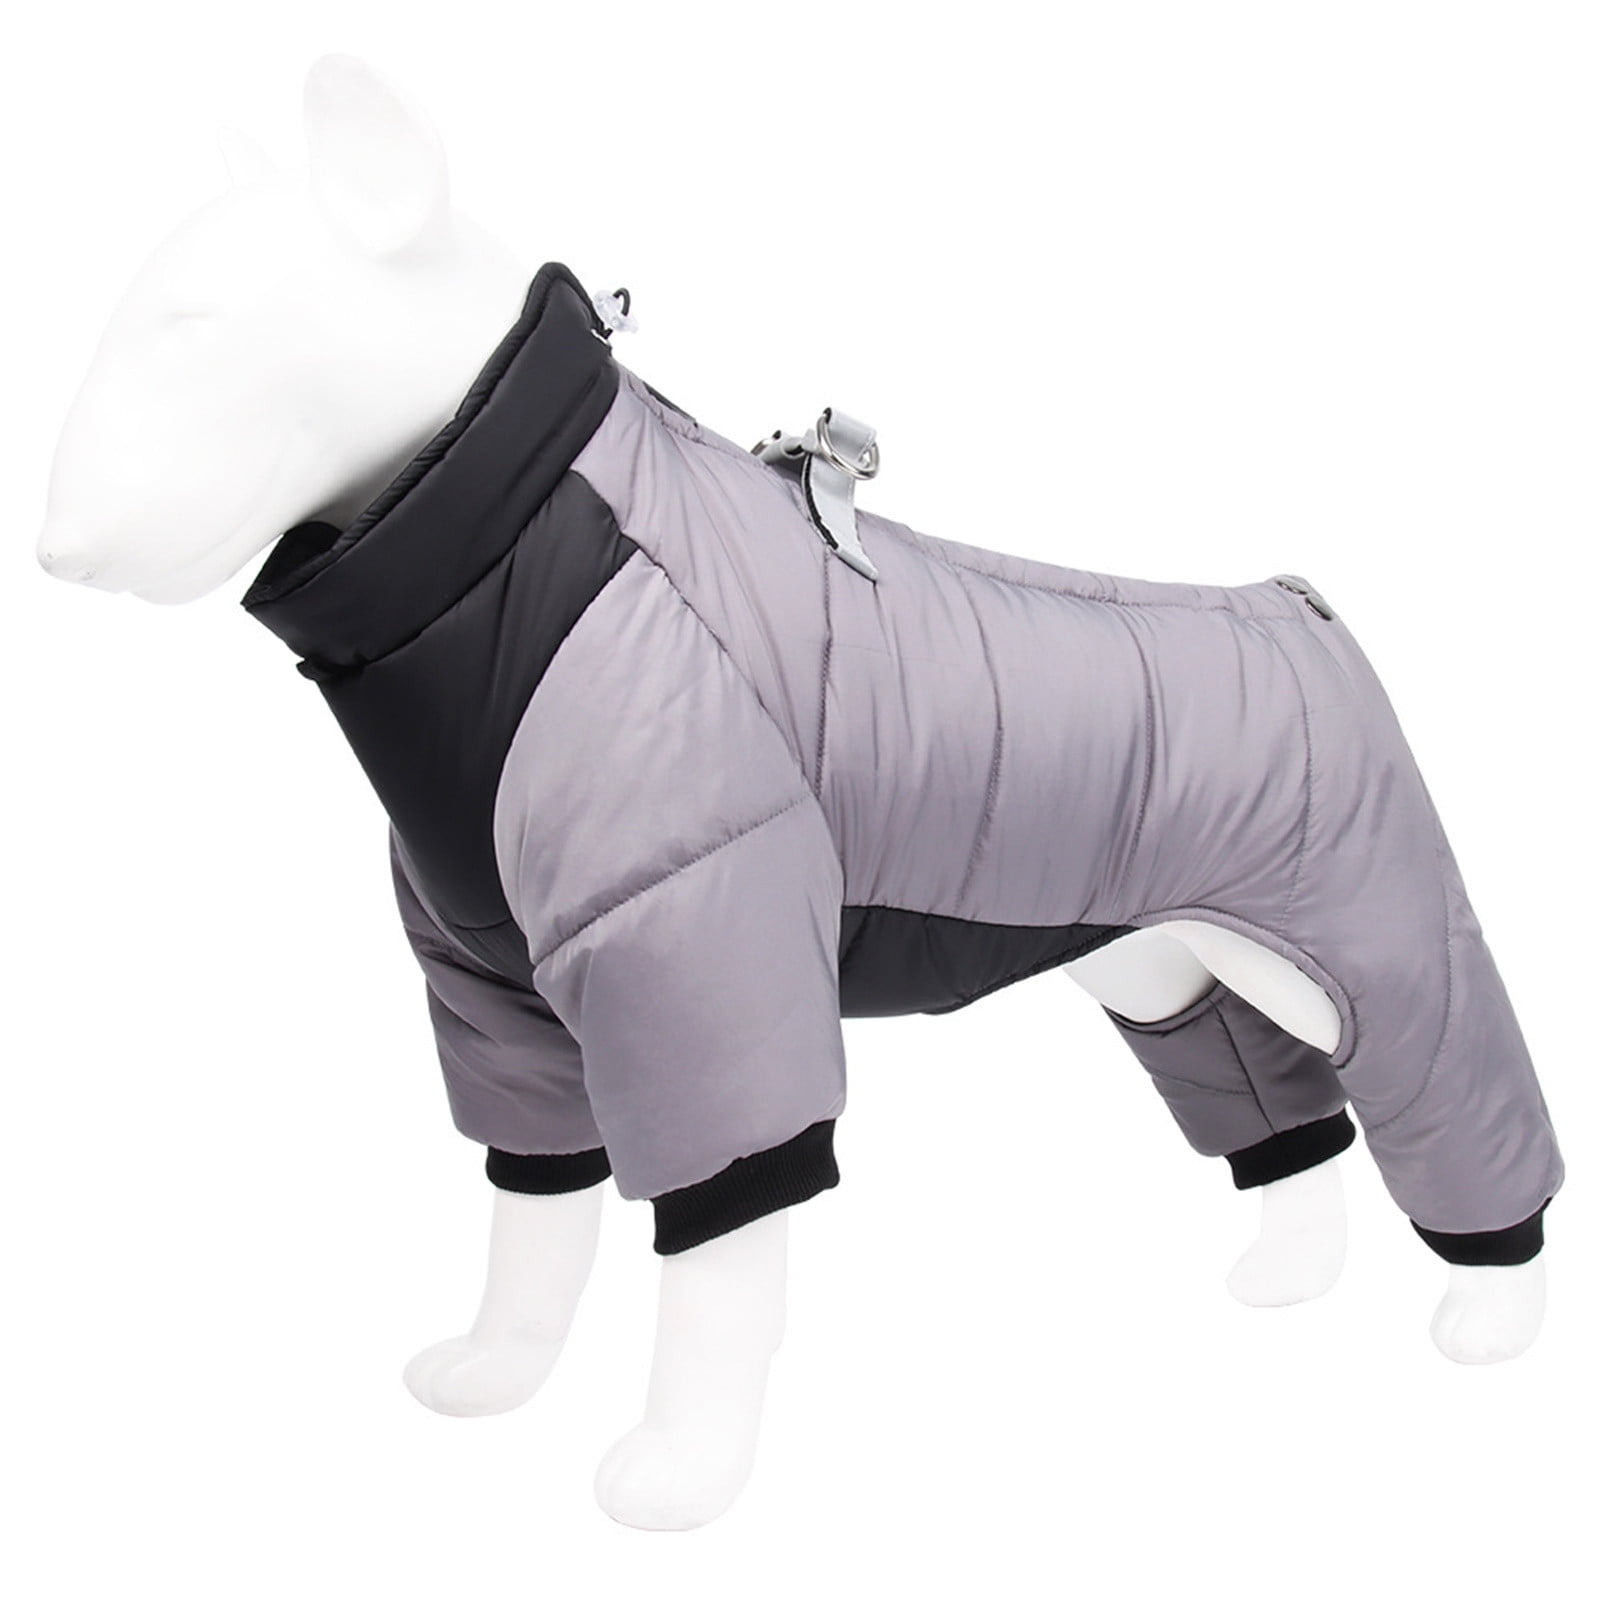 naturpark Latter Koordinere Dog Winter Coat Small Medium Large Dogs Snow Jacket Waterproof French  Clothes Warm Windproof Puppy Snowsuit Outfit Cold Weather Pet Apparel -  Walmart.com